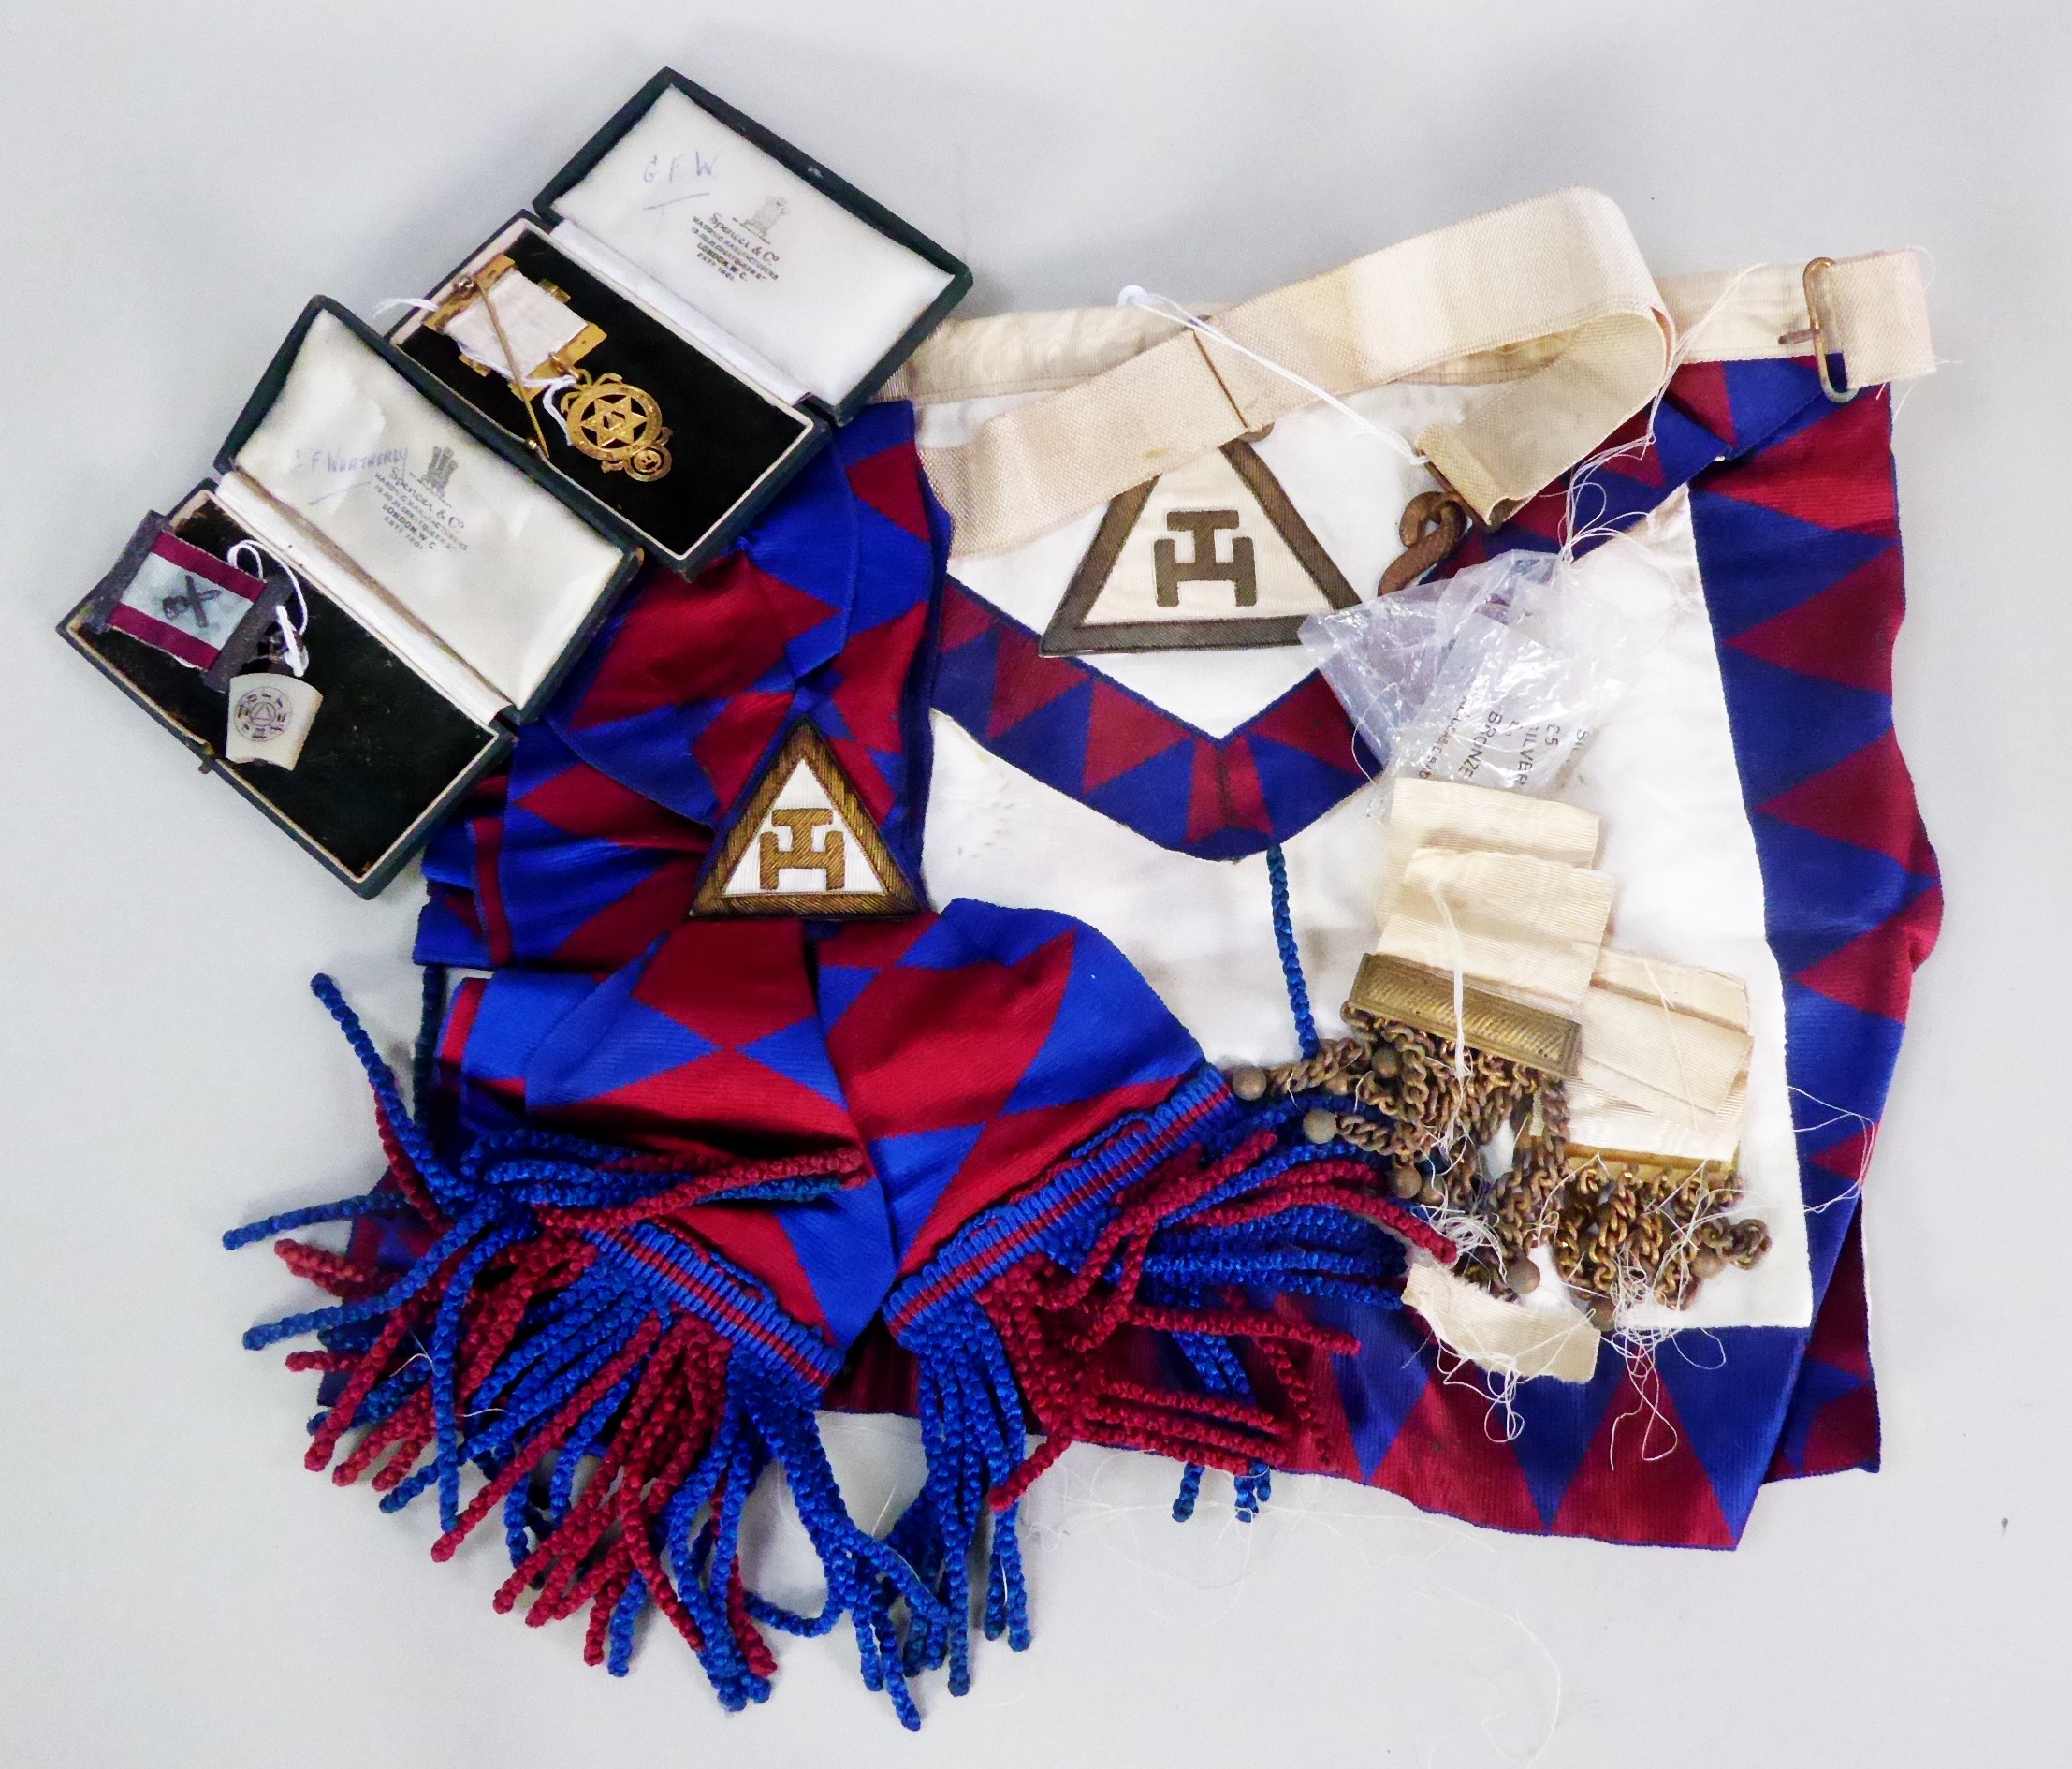 SILVER GILT MASONIC MEDAL ON RIBBON, Birmingham and ANOTHER MASONIC MEDAL with silver mounted ribbon